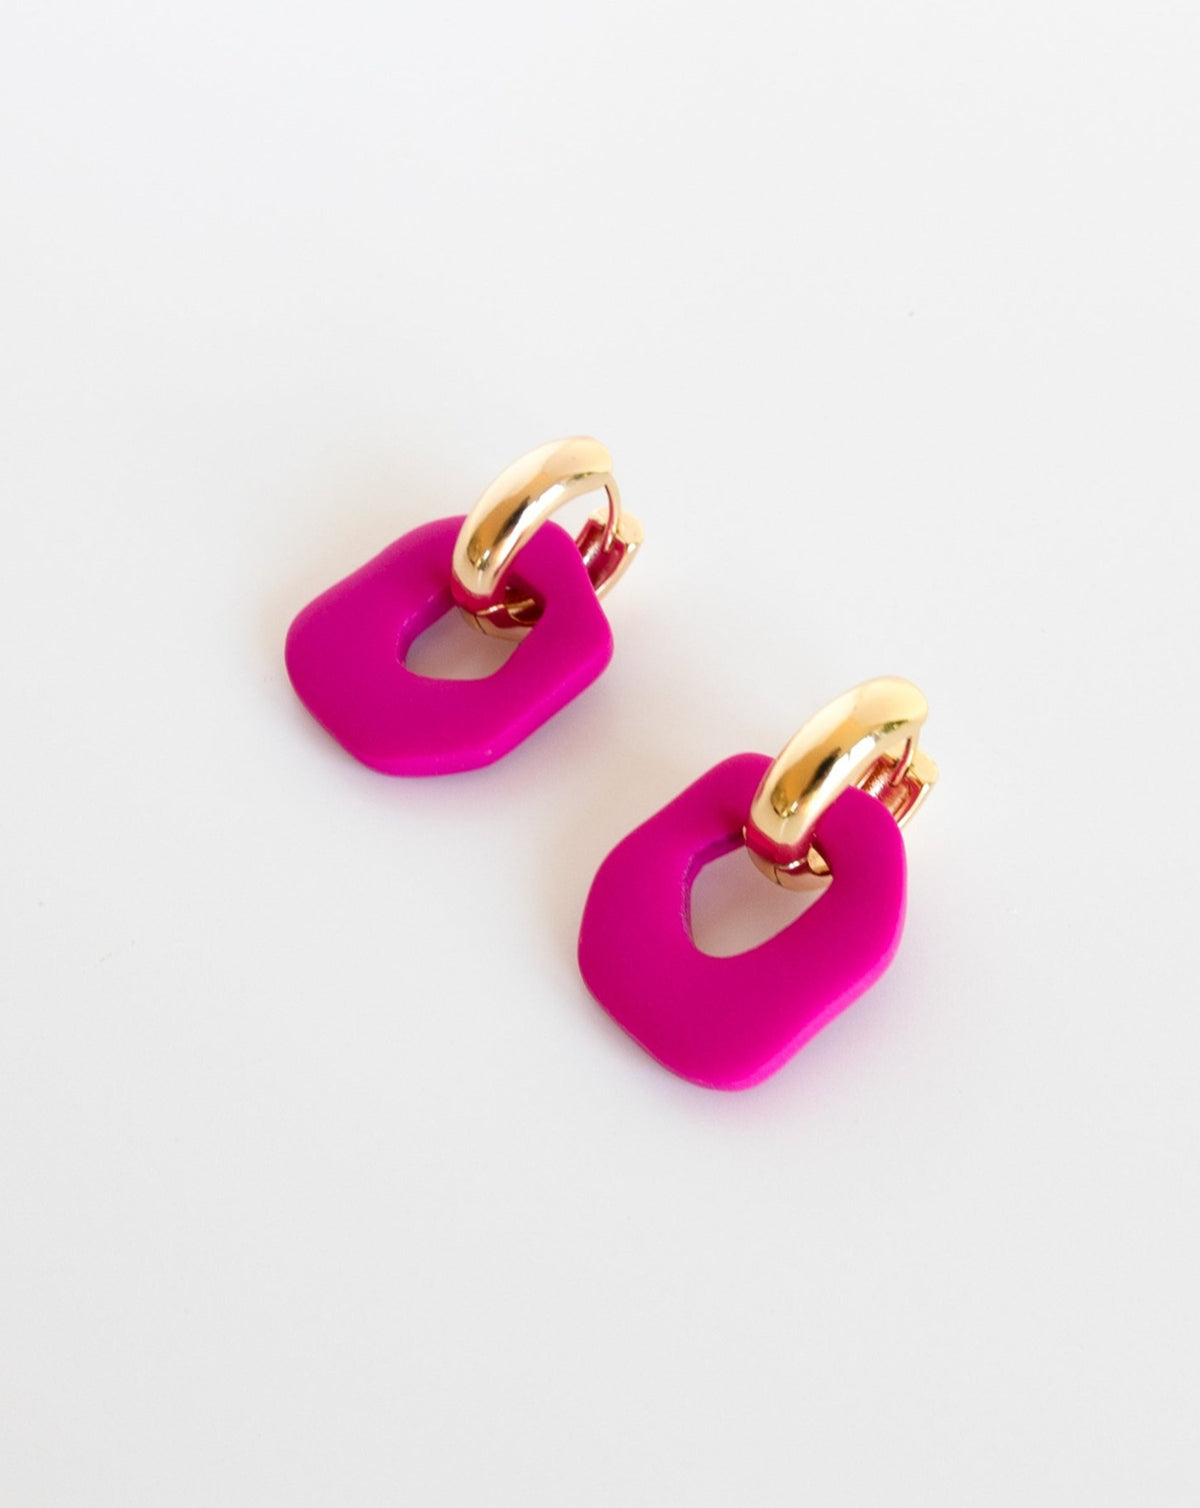 Darien earrings in Fuchsia color with gold hoops, side view